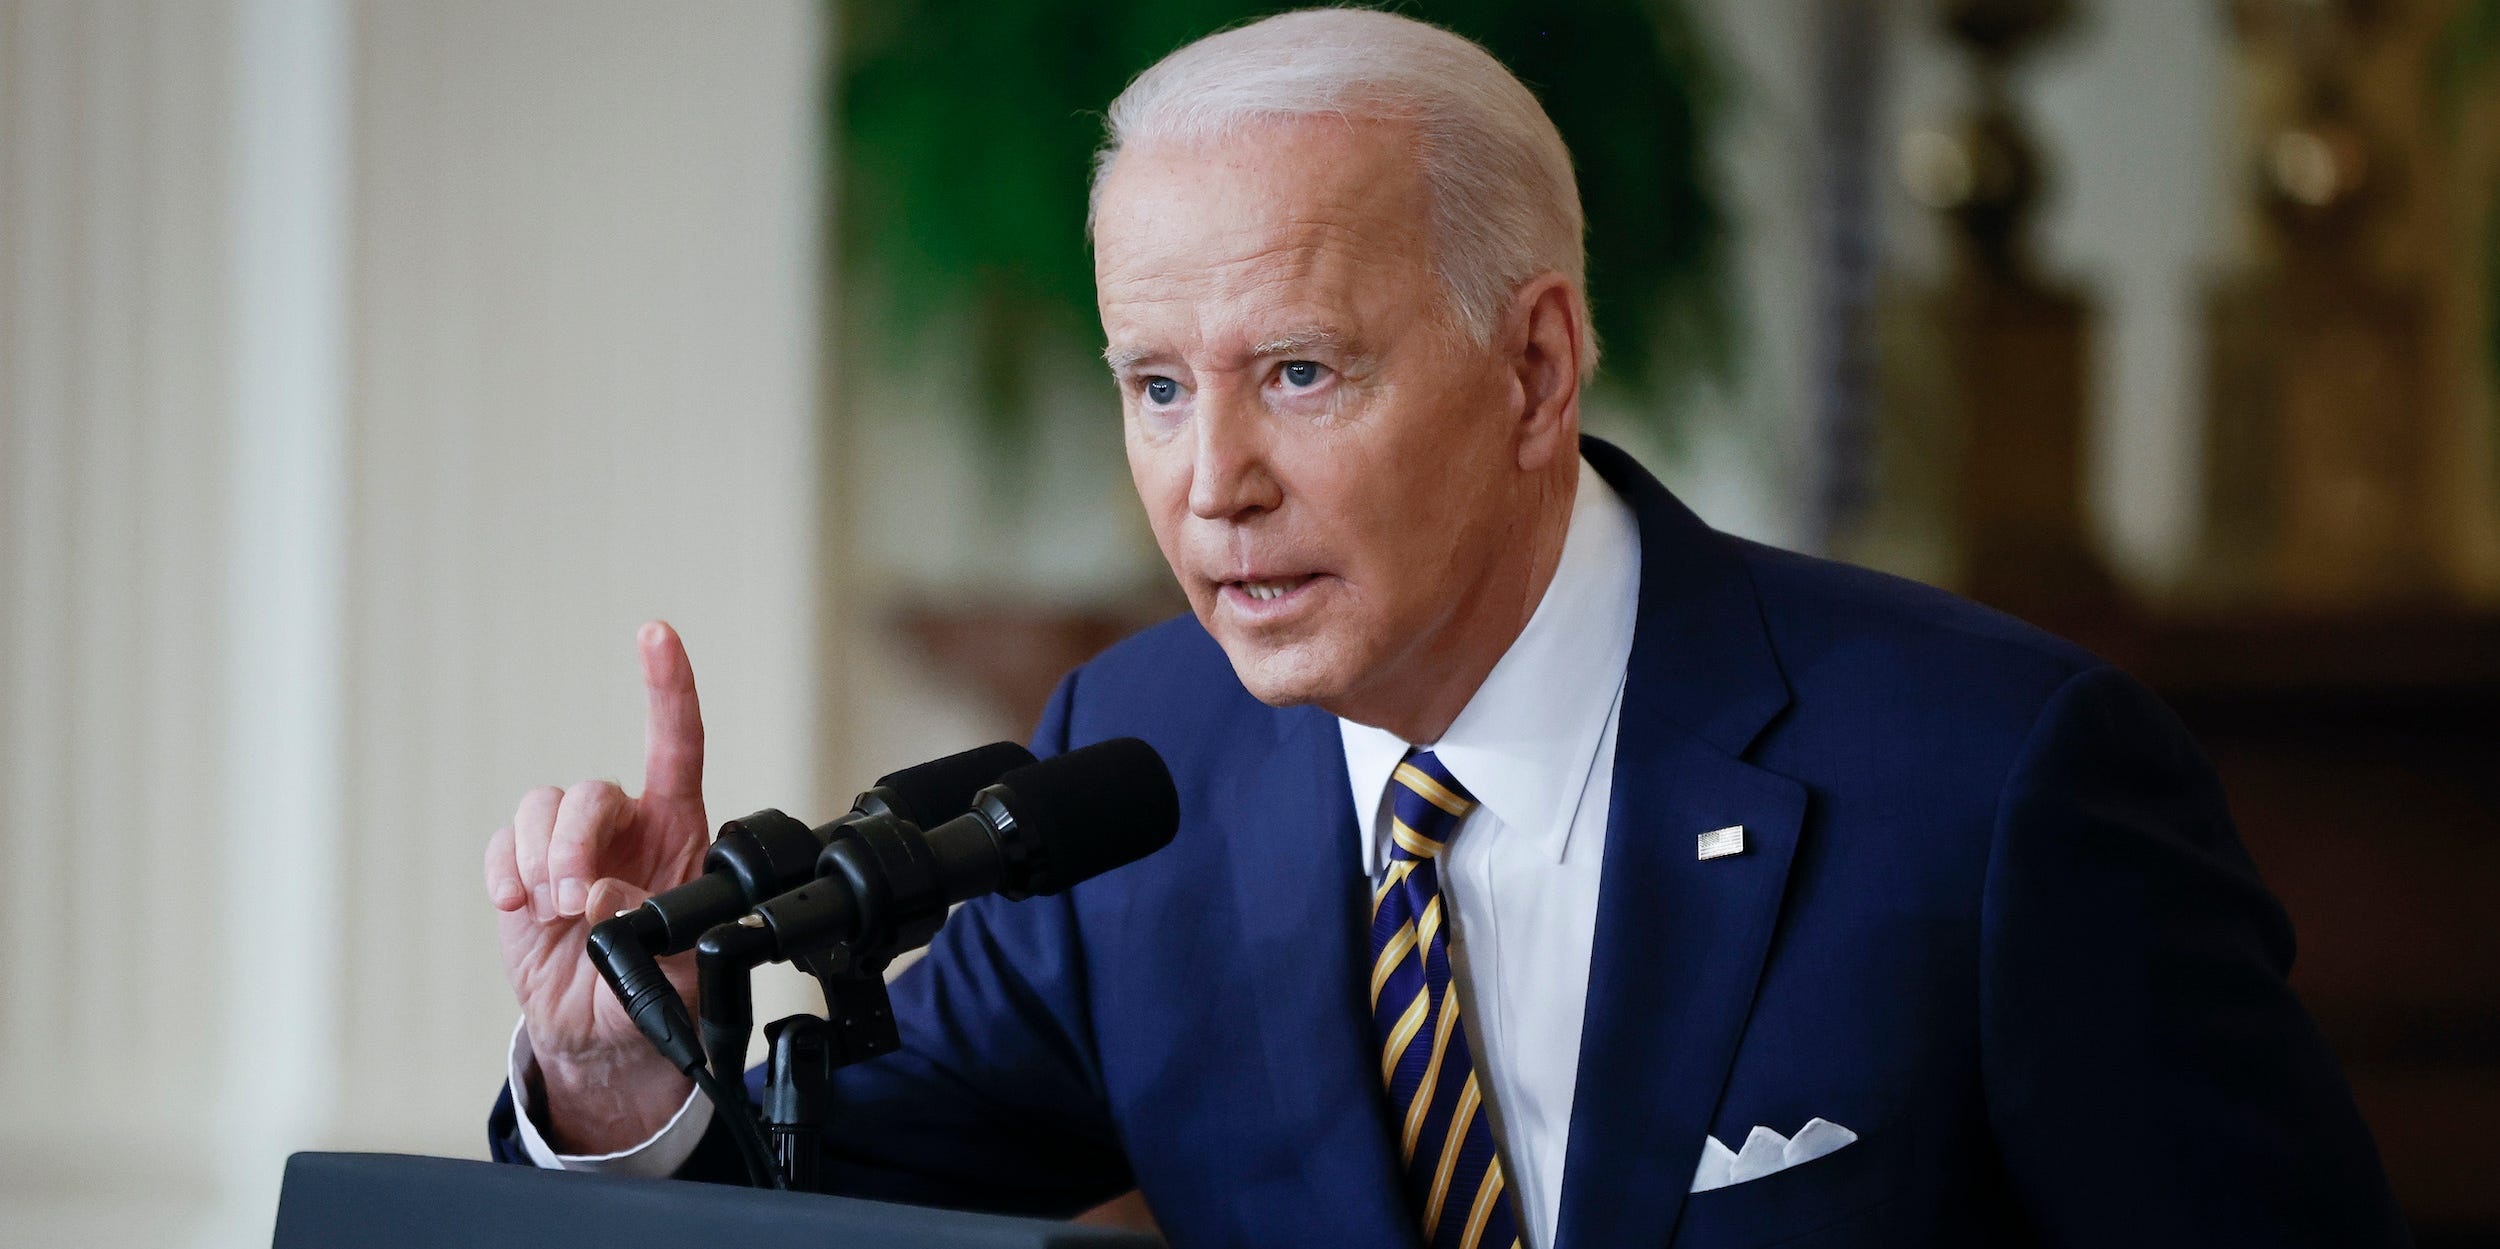 President Joe Biden at his first press conference of 2022.